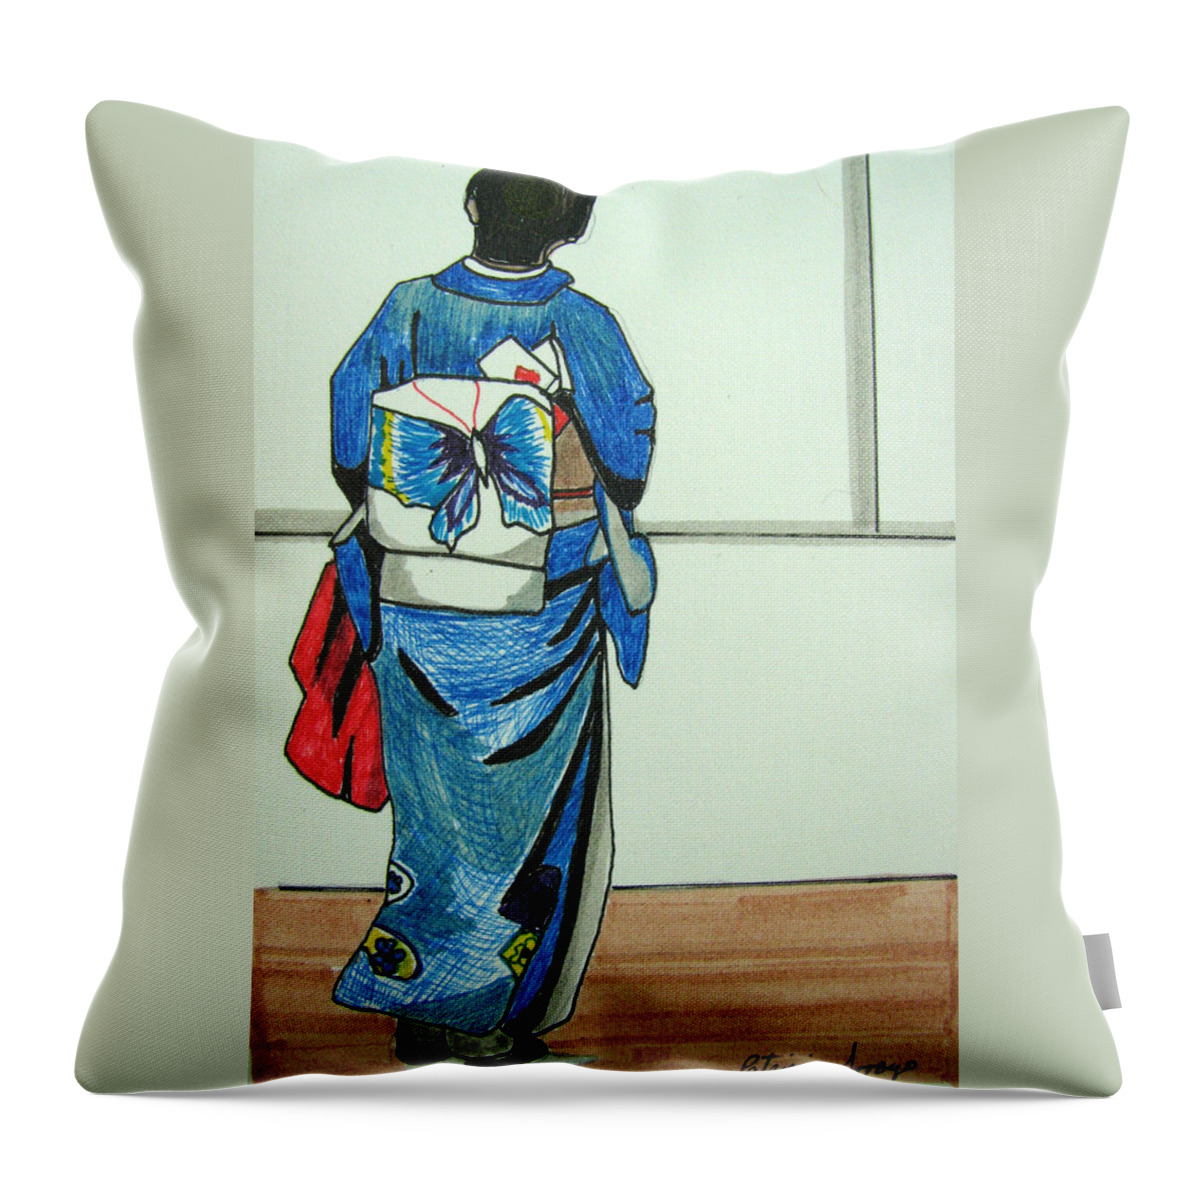 Japonese Culture Throw Pillow featuring the drawing Japonese Girl by Patricia Arroyo